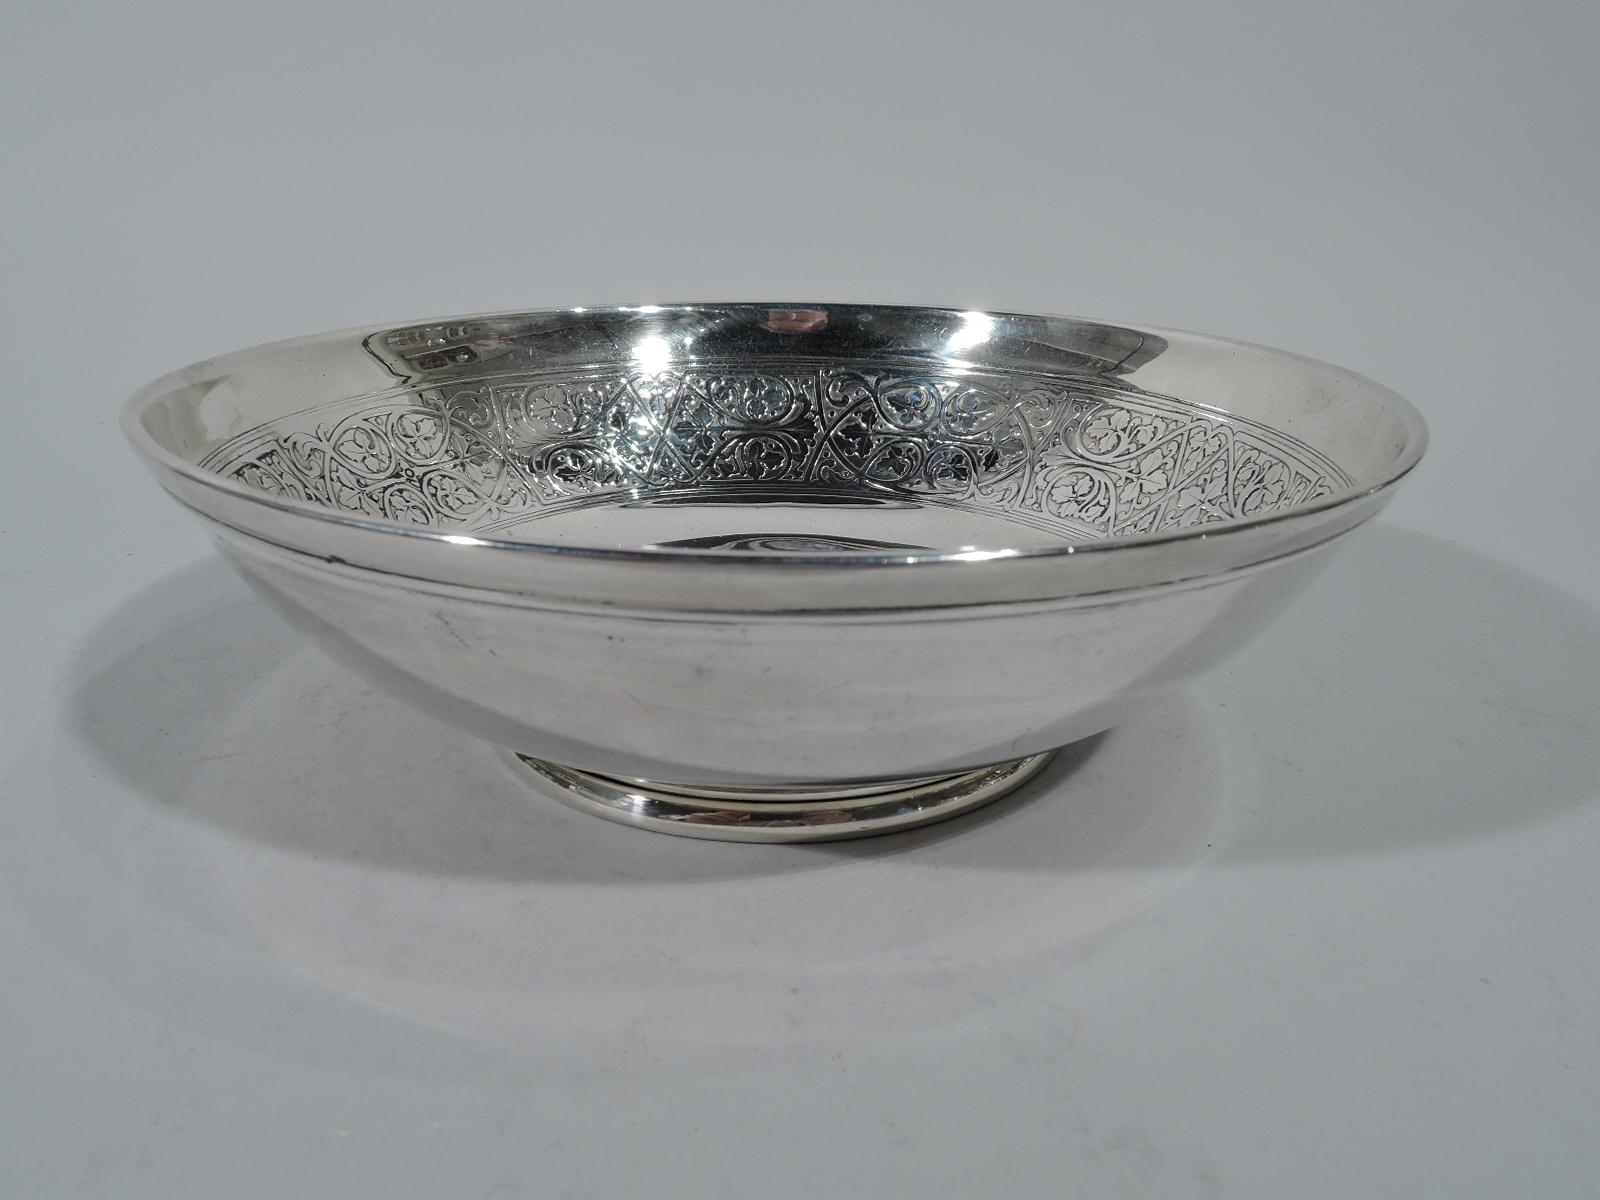 Edwardian sterling silver bowl. Made by Tiffany & Co. in New York. Curved sides, turned-down rim, and inset reeded foot. Interior has wide acid-etched band comprising curvilinear frame inset with stylized leaves. Wreath with same in center (vacant).